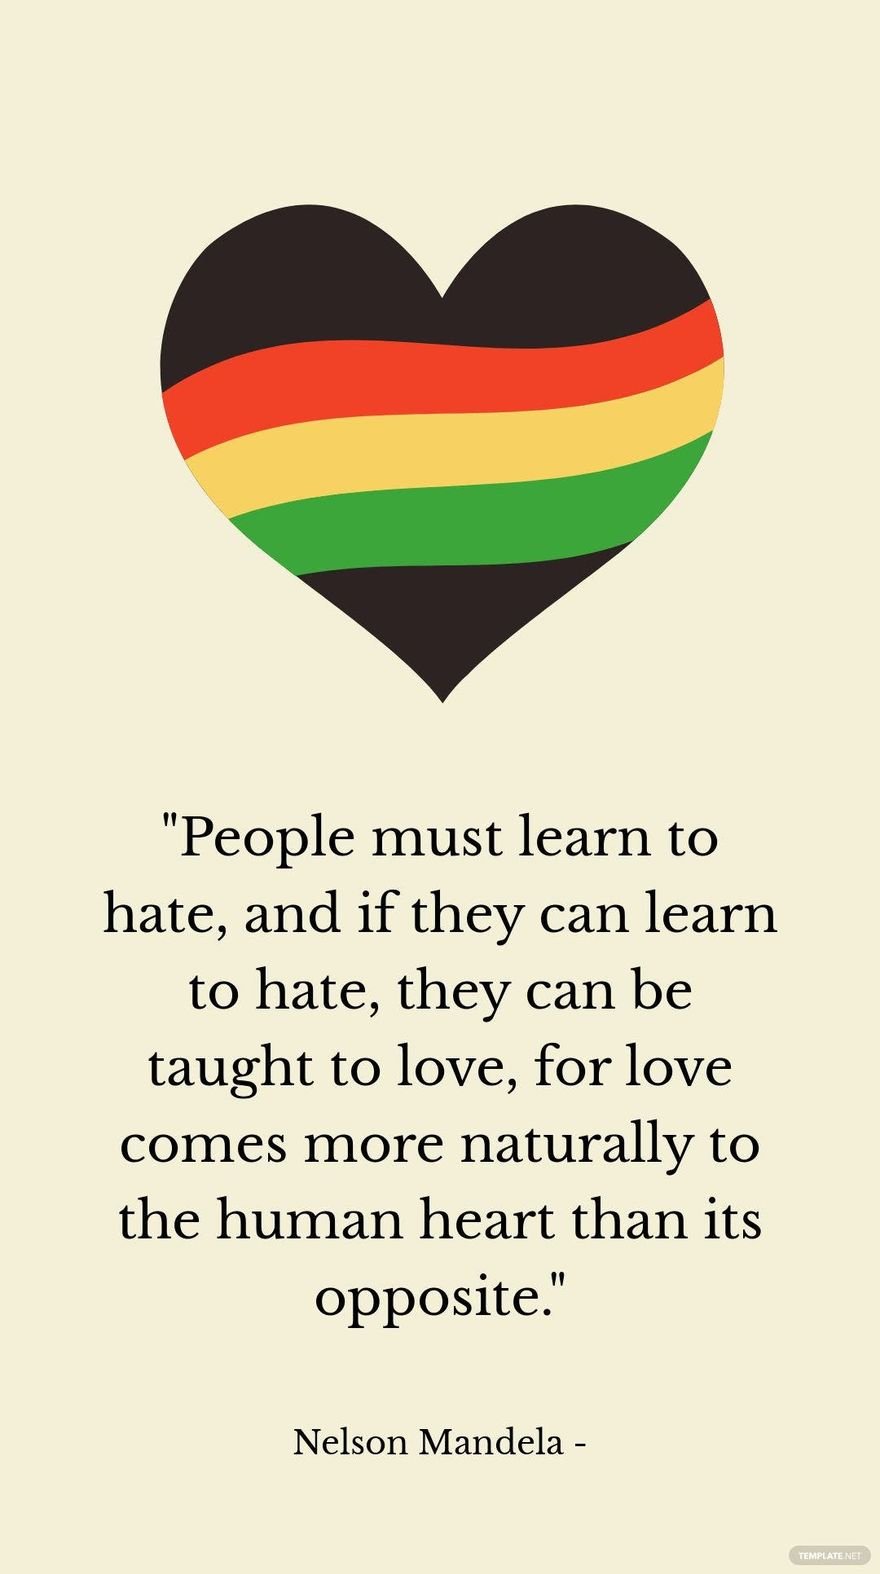 Nelson Mandela - People must learn to hate, and if they can learn to hate, they can be taught to love, for love comes more naturally to the human heart than its opposite.